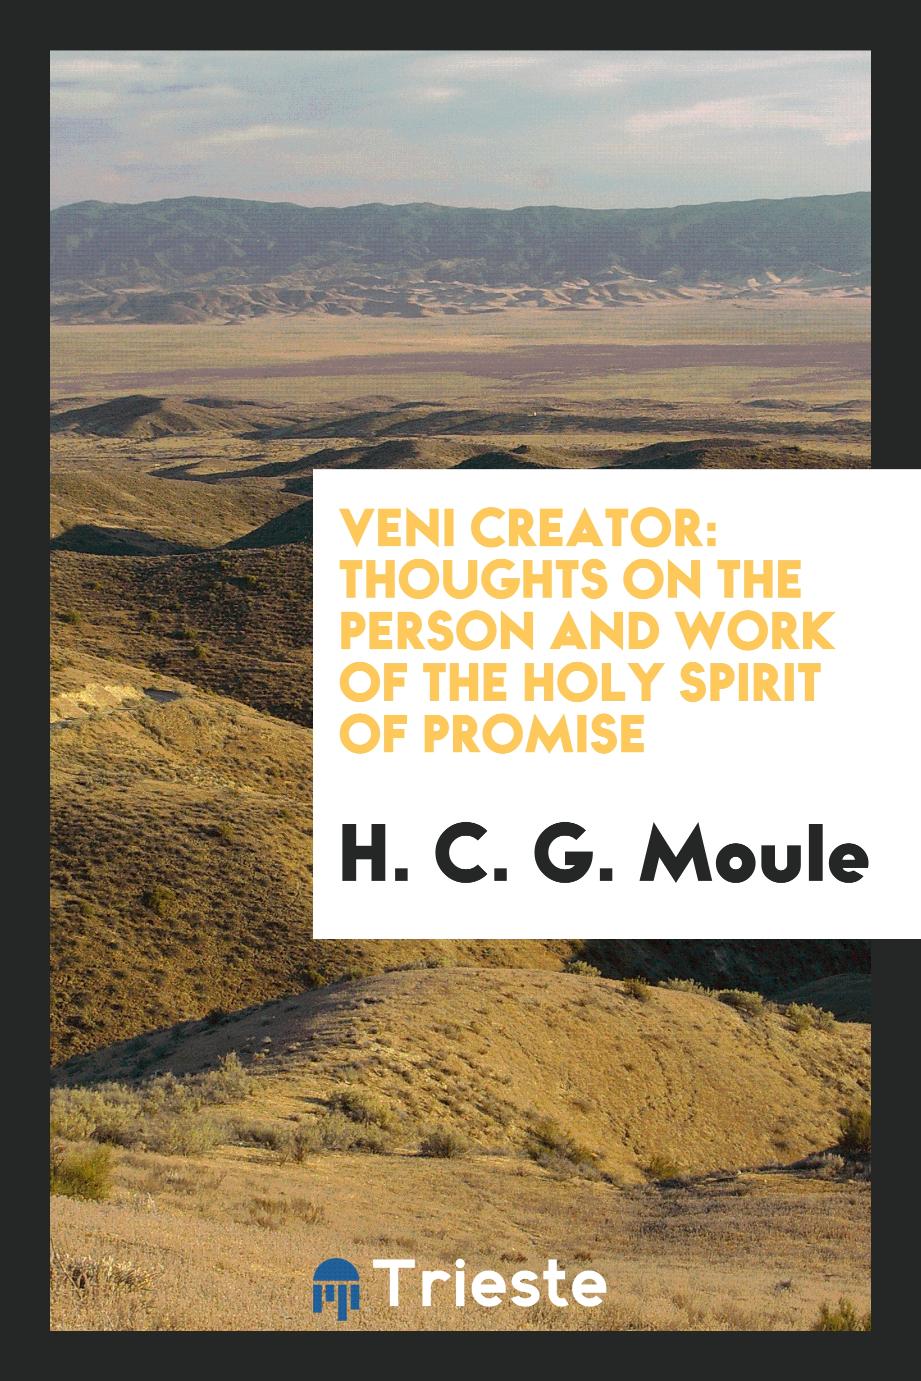 Veni creator: thoughts on the person and work of the Holy Spirit of promise